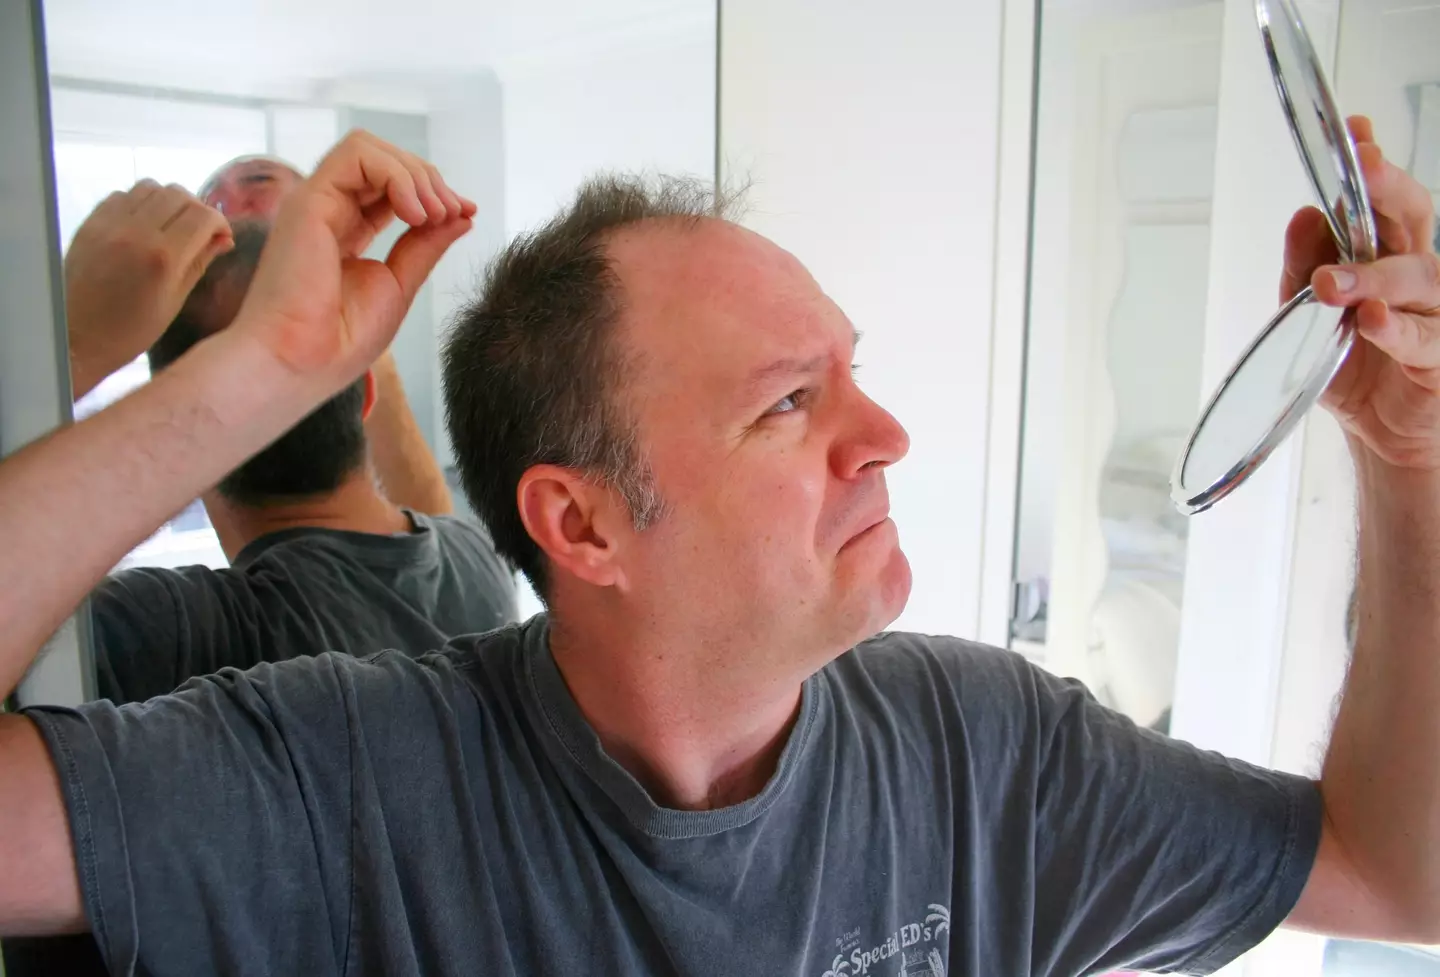 The discovery of a new gene could potentially lead to a cure for baldness.